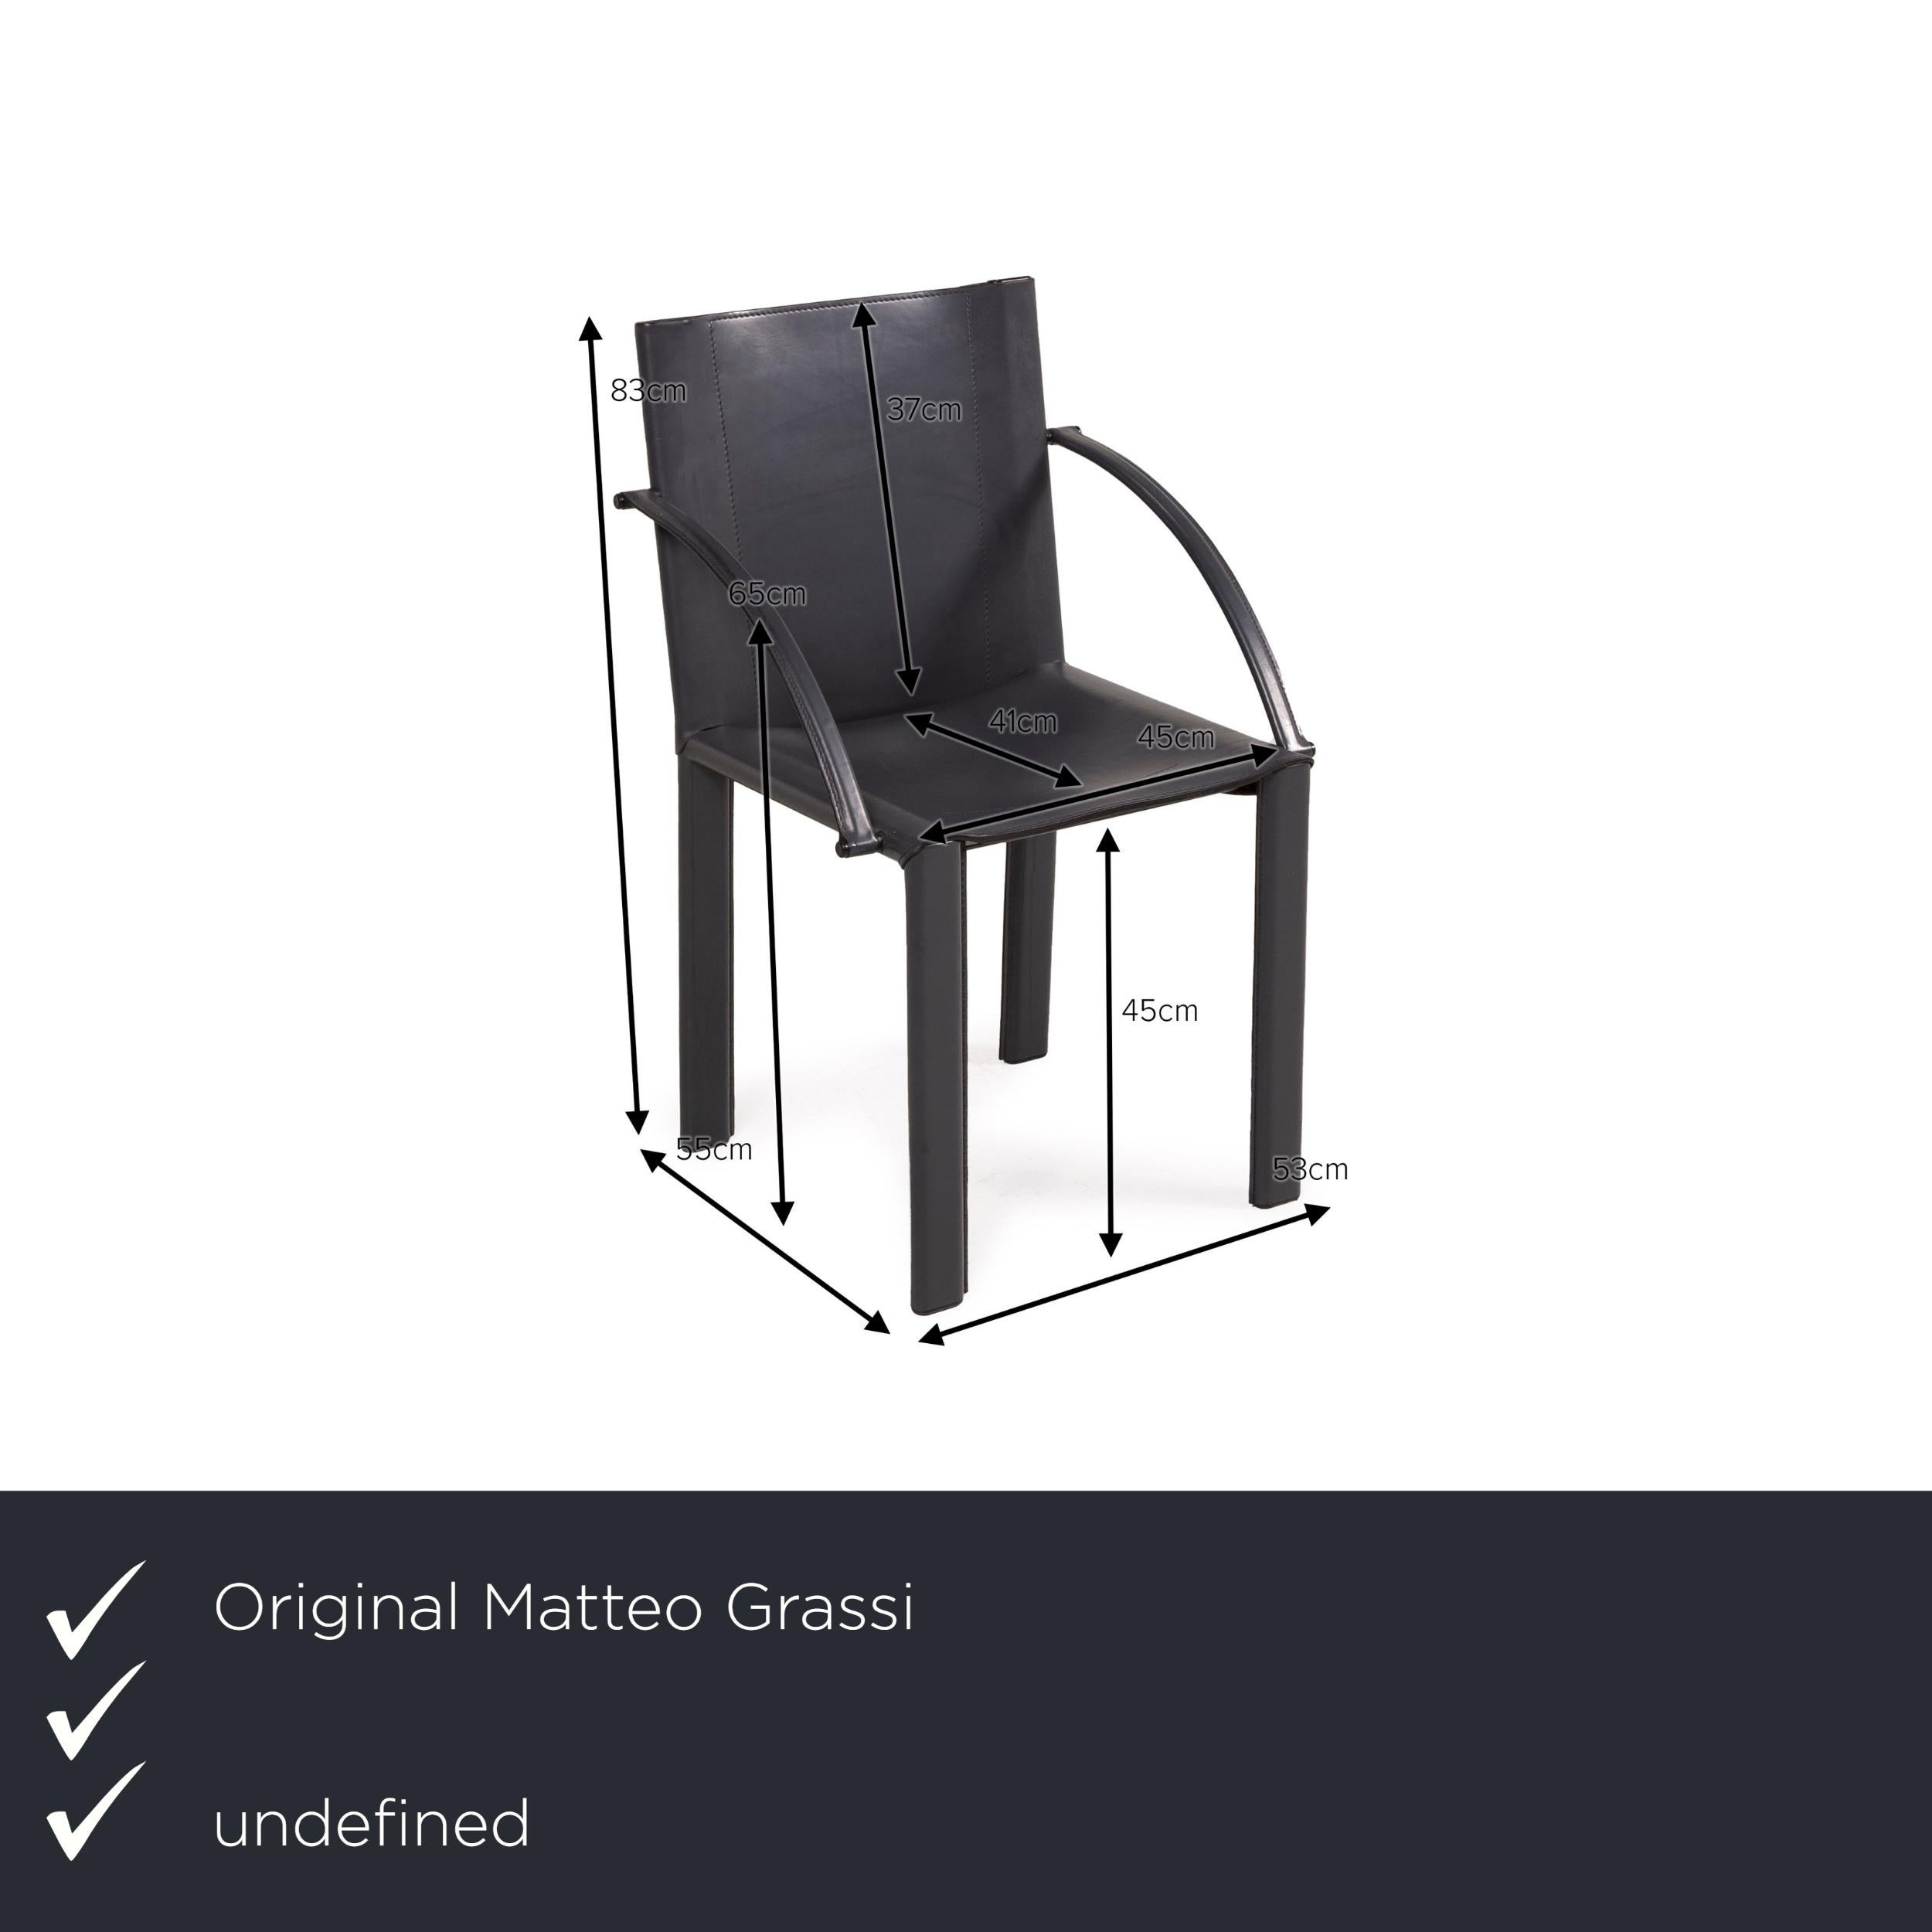 We present to you a Matteo Grassi leather chair set black vintage armchair set.


 Product measurements in centimeters:
 

Depth: 55
Width: 53
Height: 83
Seat height: 45
Rest height: 64
Seat depth: 41
Seat width: 45
Back height: 37.
 